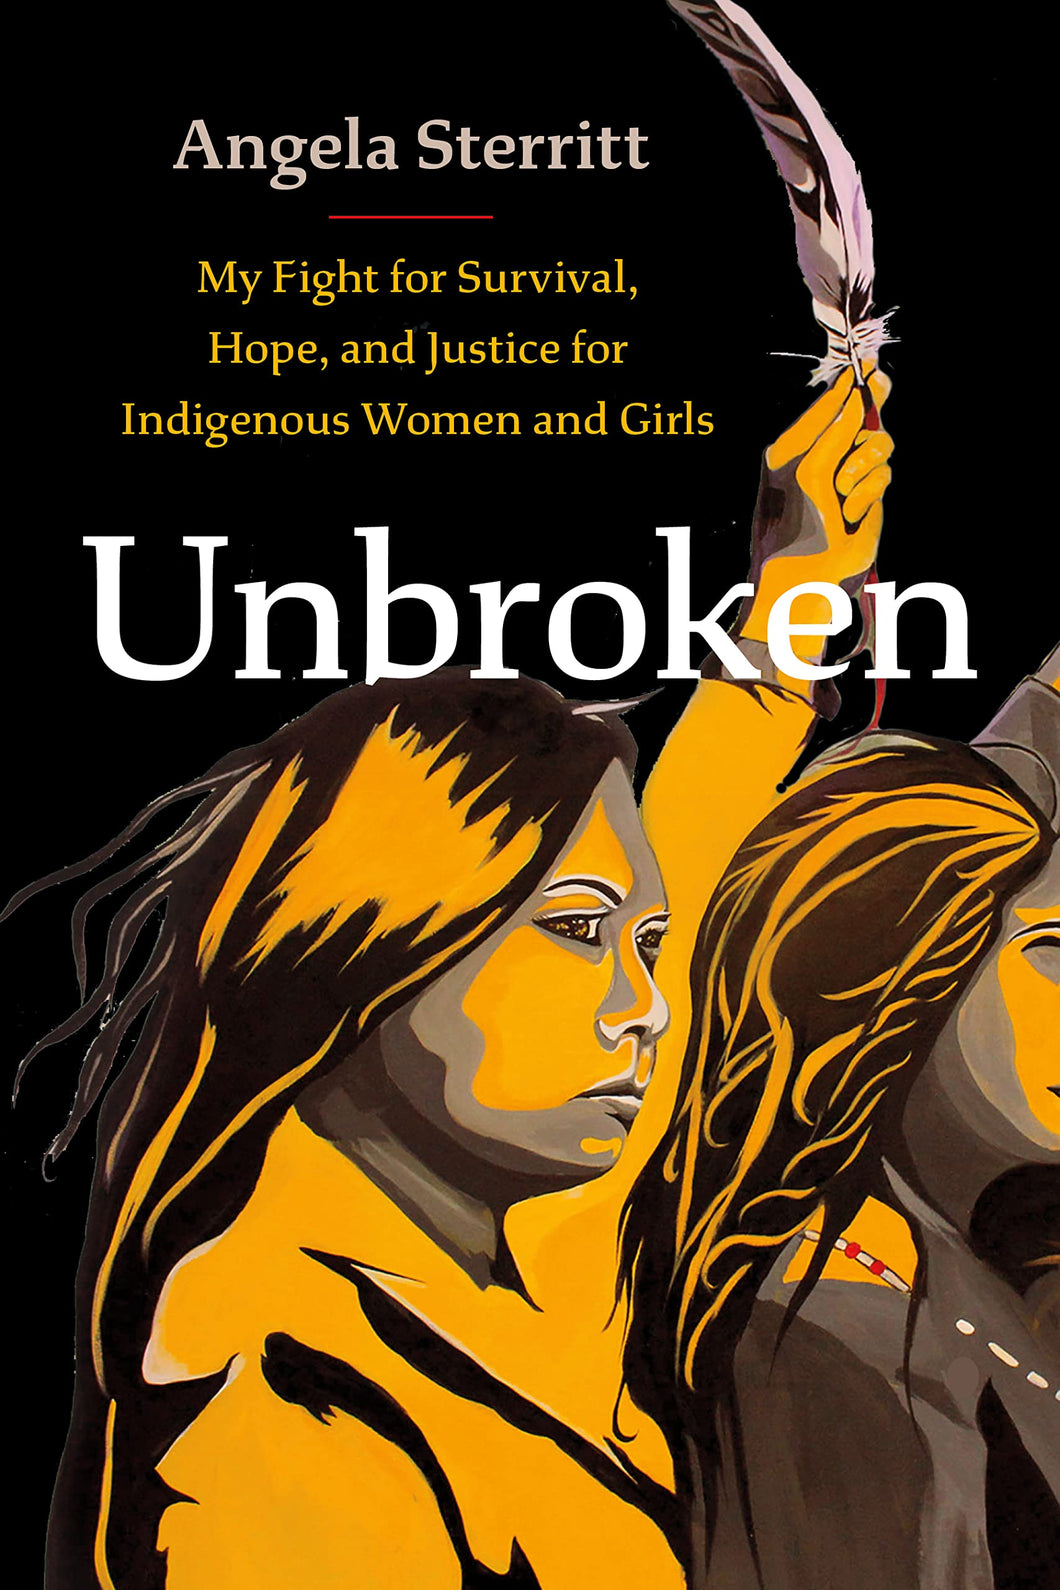 Unbroken: My Fight for Survival, Hope, and Justice for Indigenous Women and Girls [Angela Sterritt]